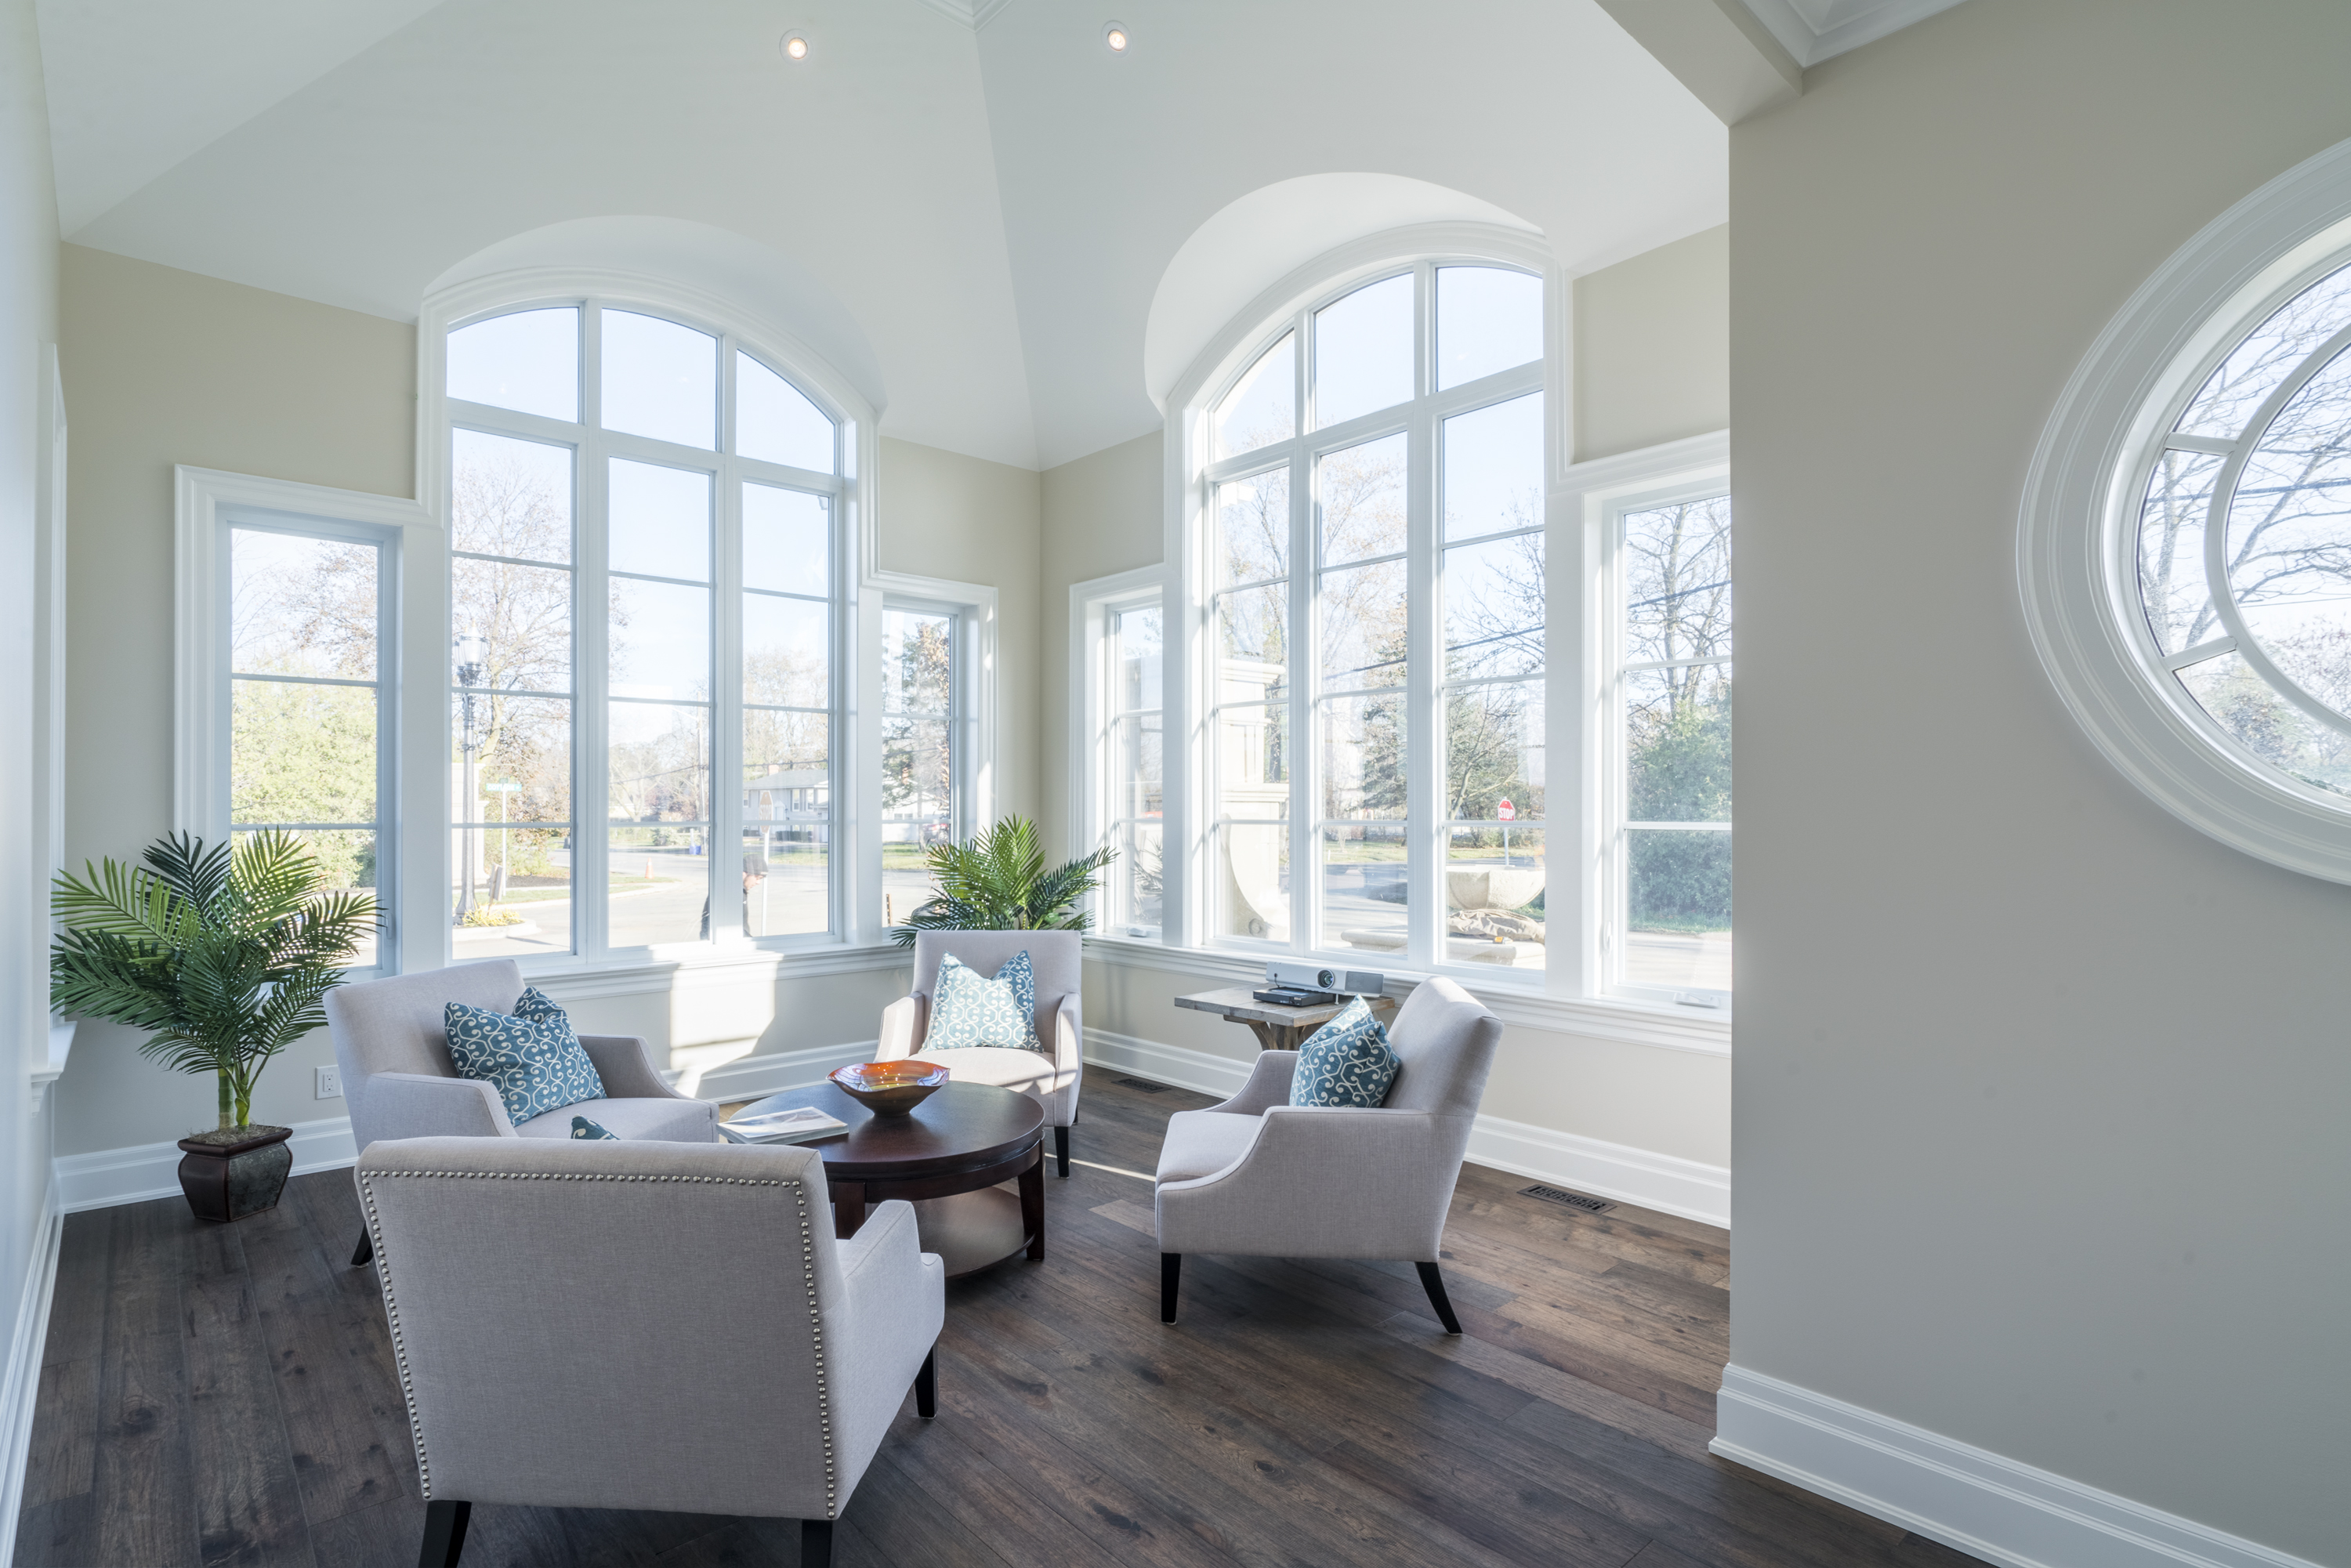 Sun filtering in through casement and fixed windows to illuminate a living room